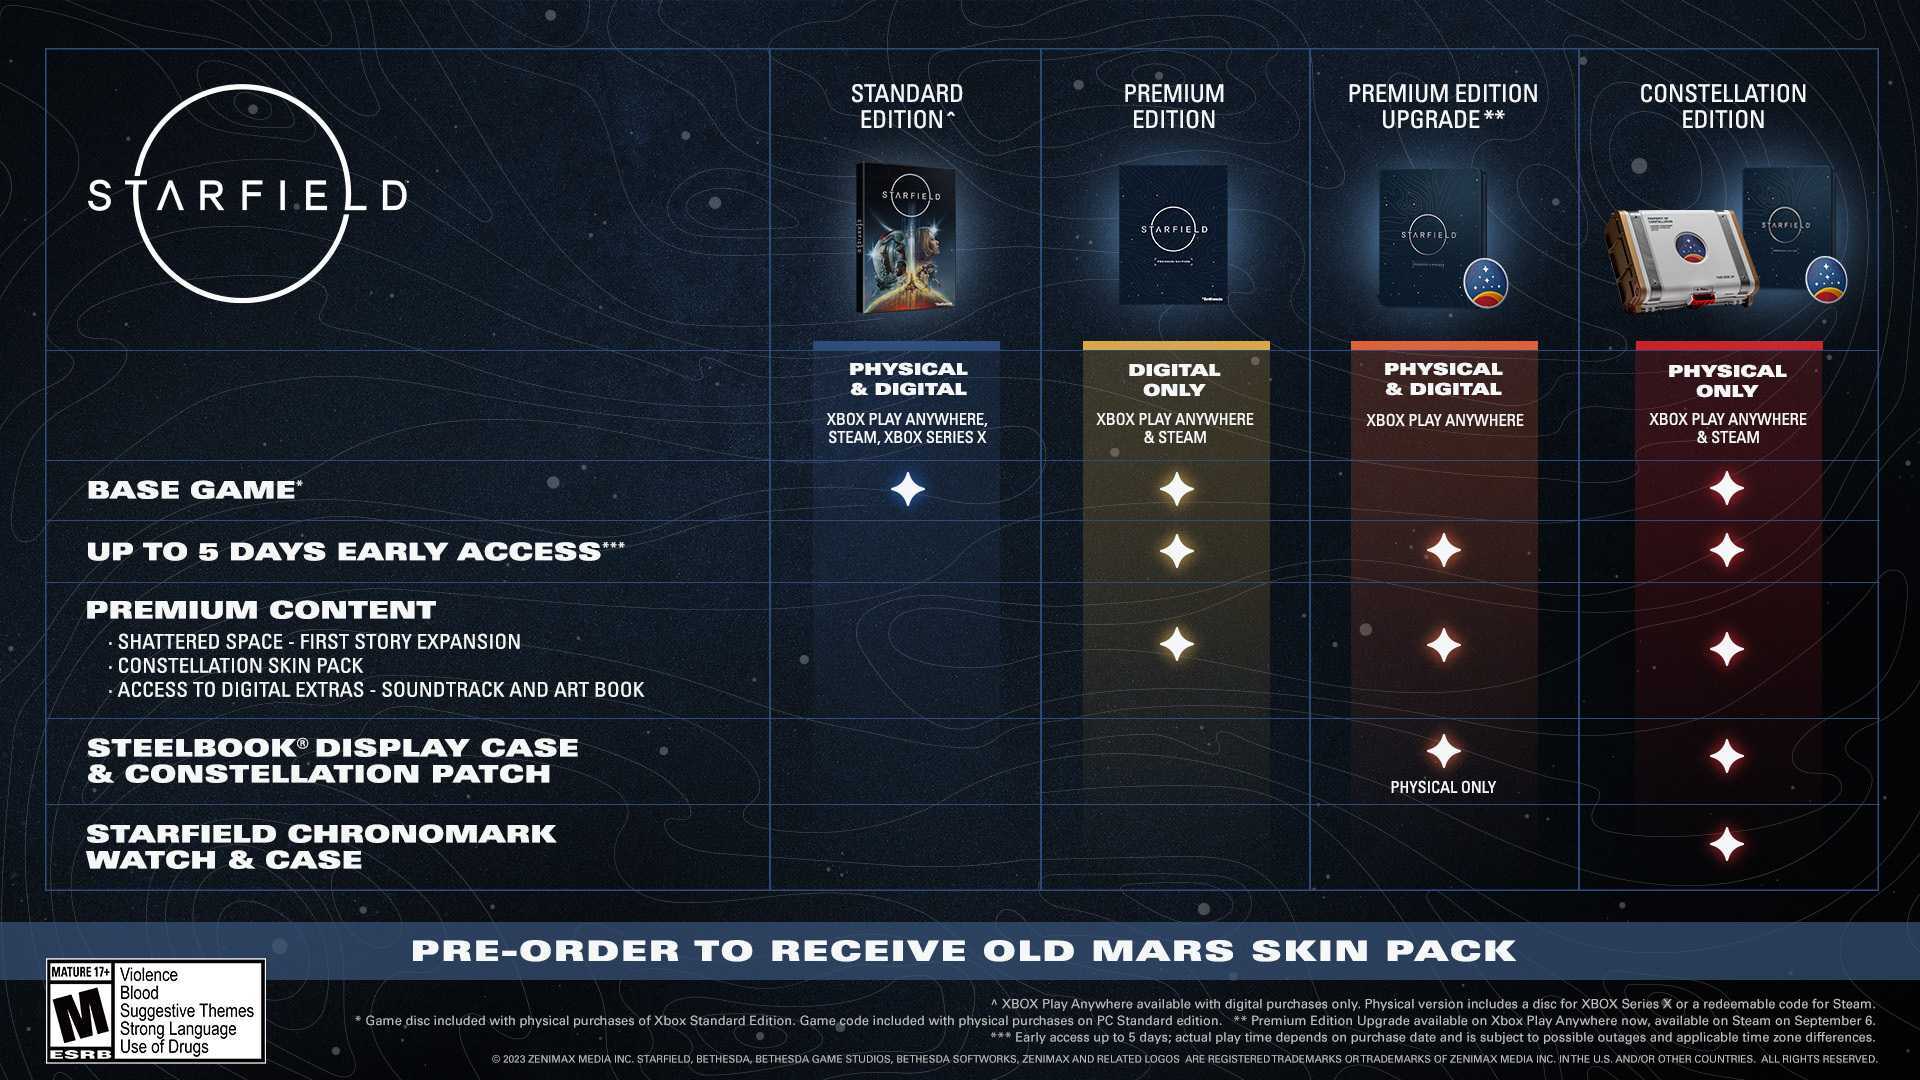 Image comparing the different editions of Starfield